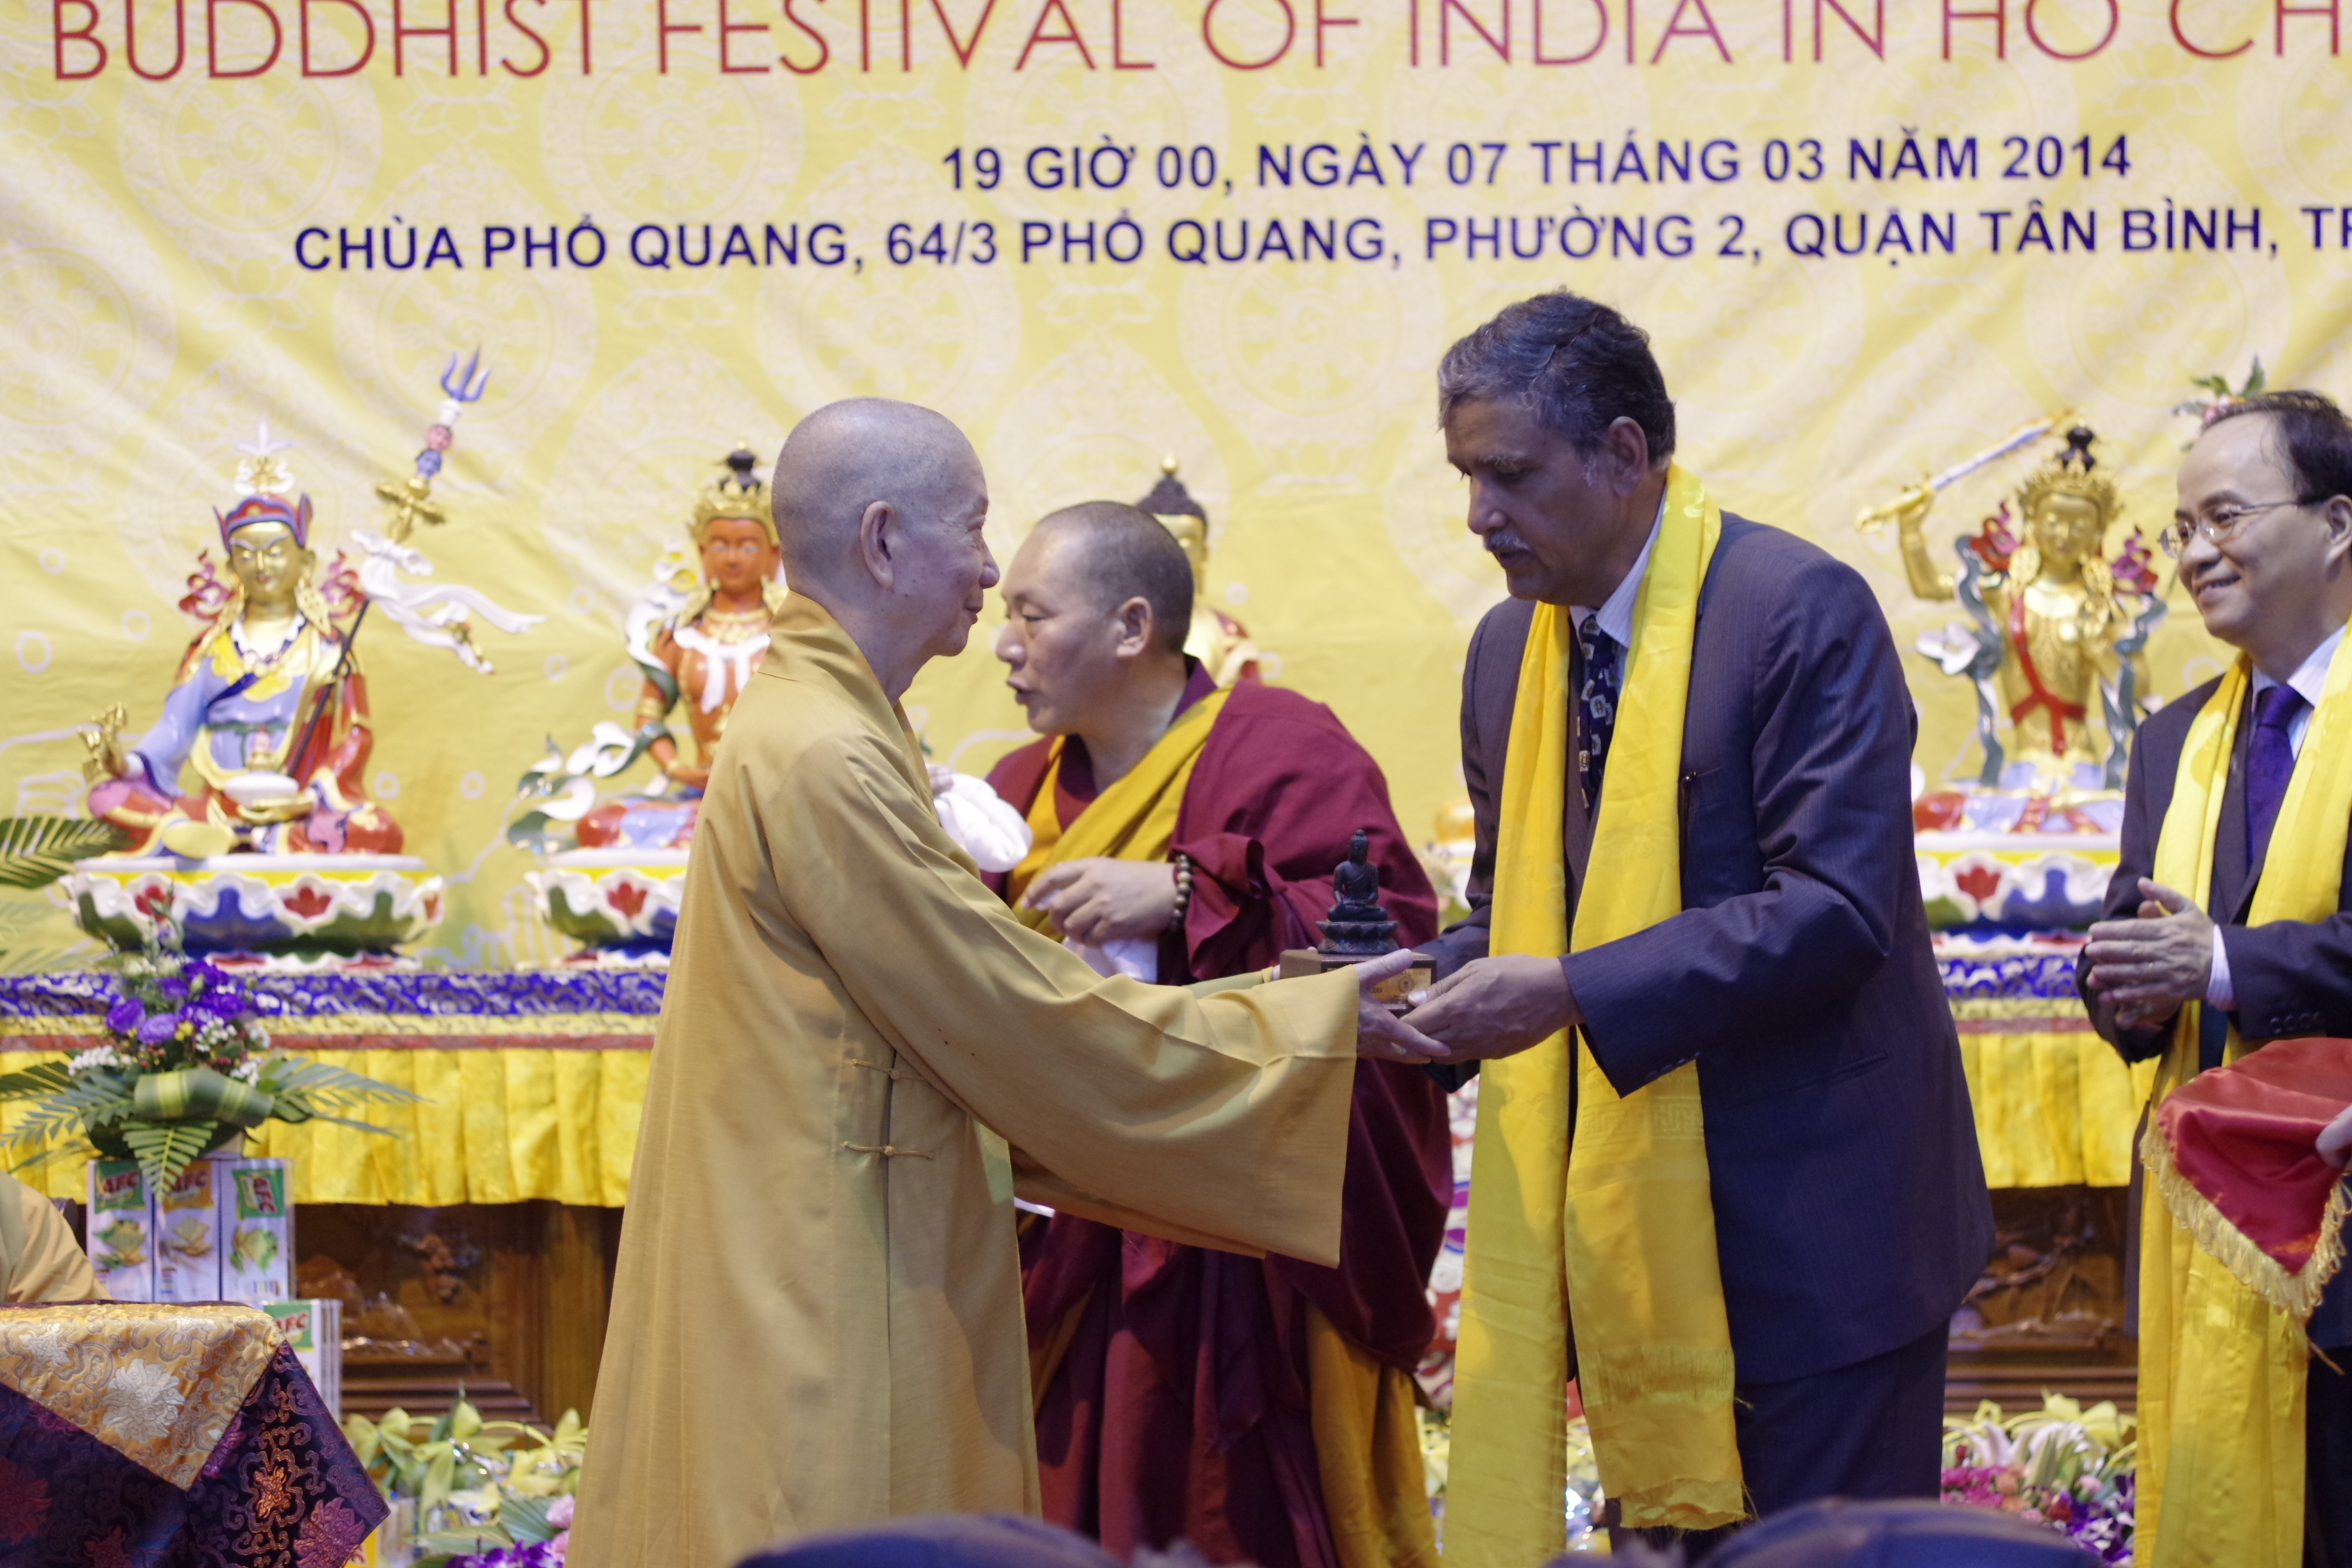 Indian Buddhist Festival kicks off in town